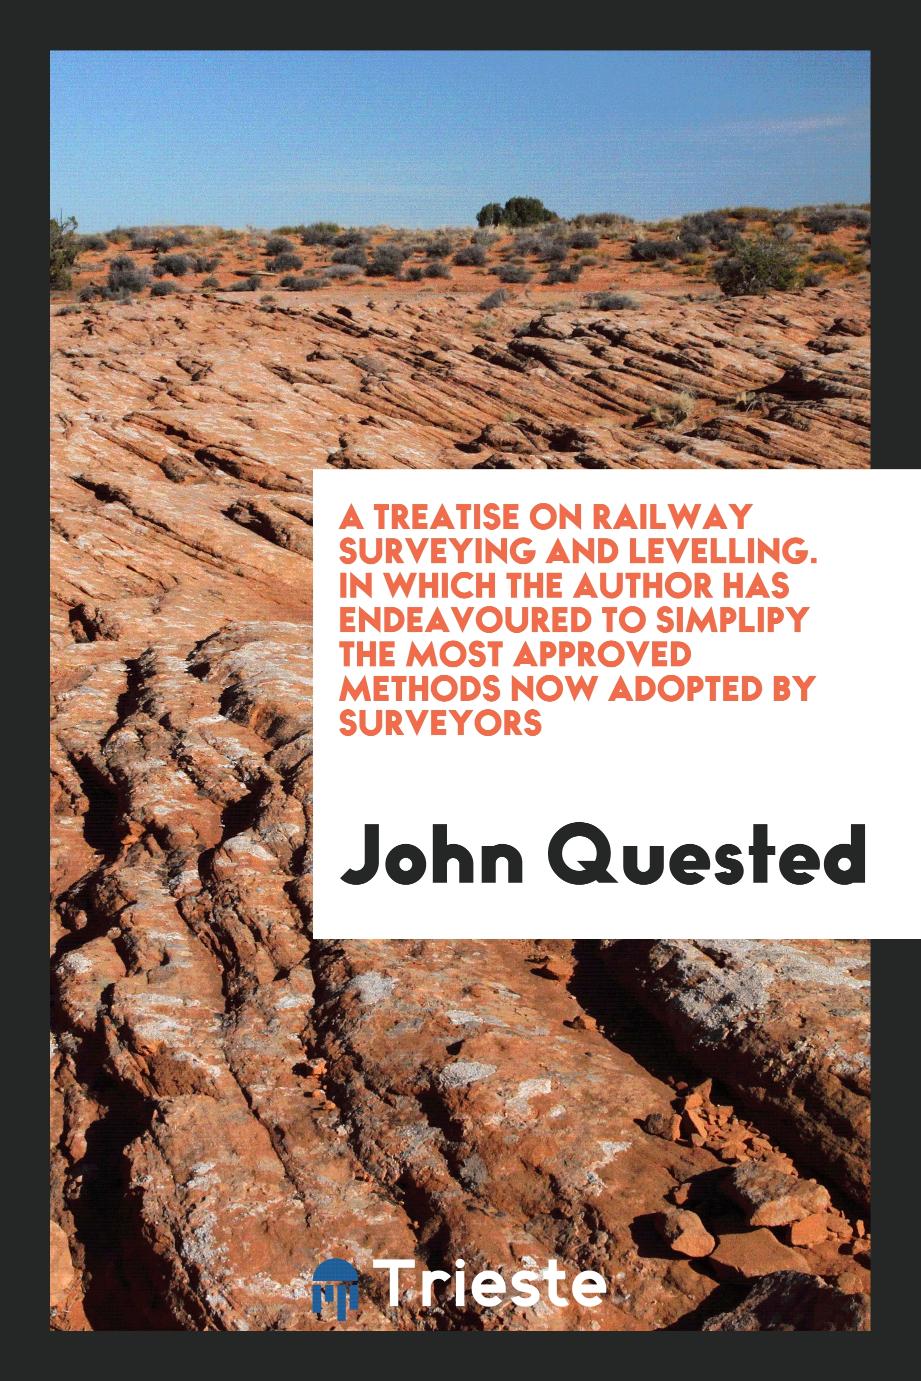 A treatise on railway surveying and levelling. In which the author has endeavoured to simplipy the most approved methods now adopted by surveyors